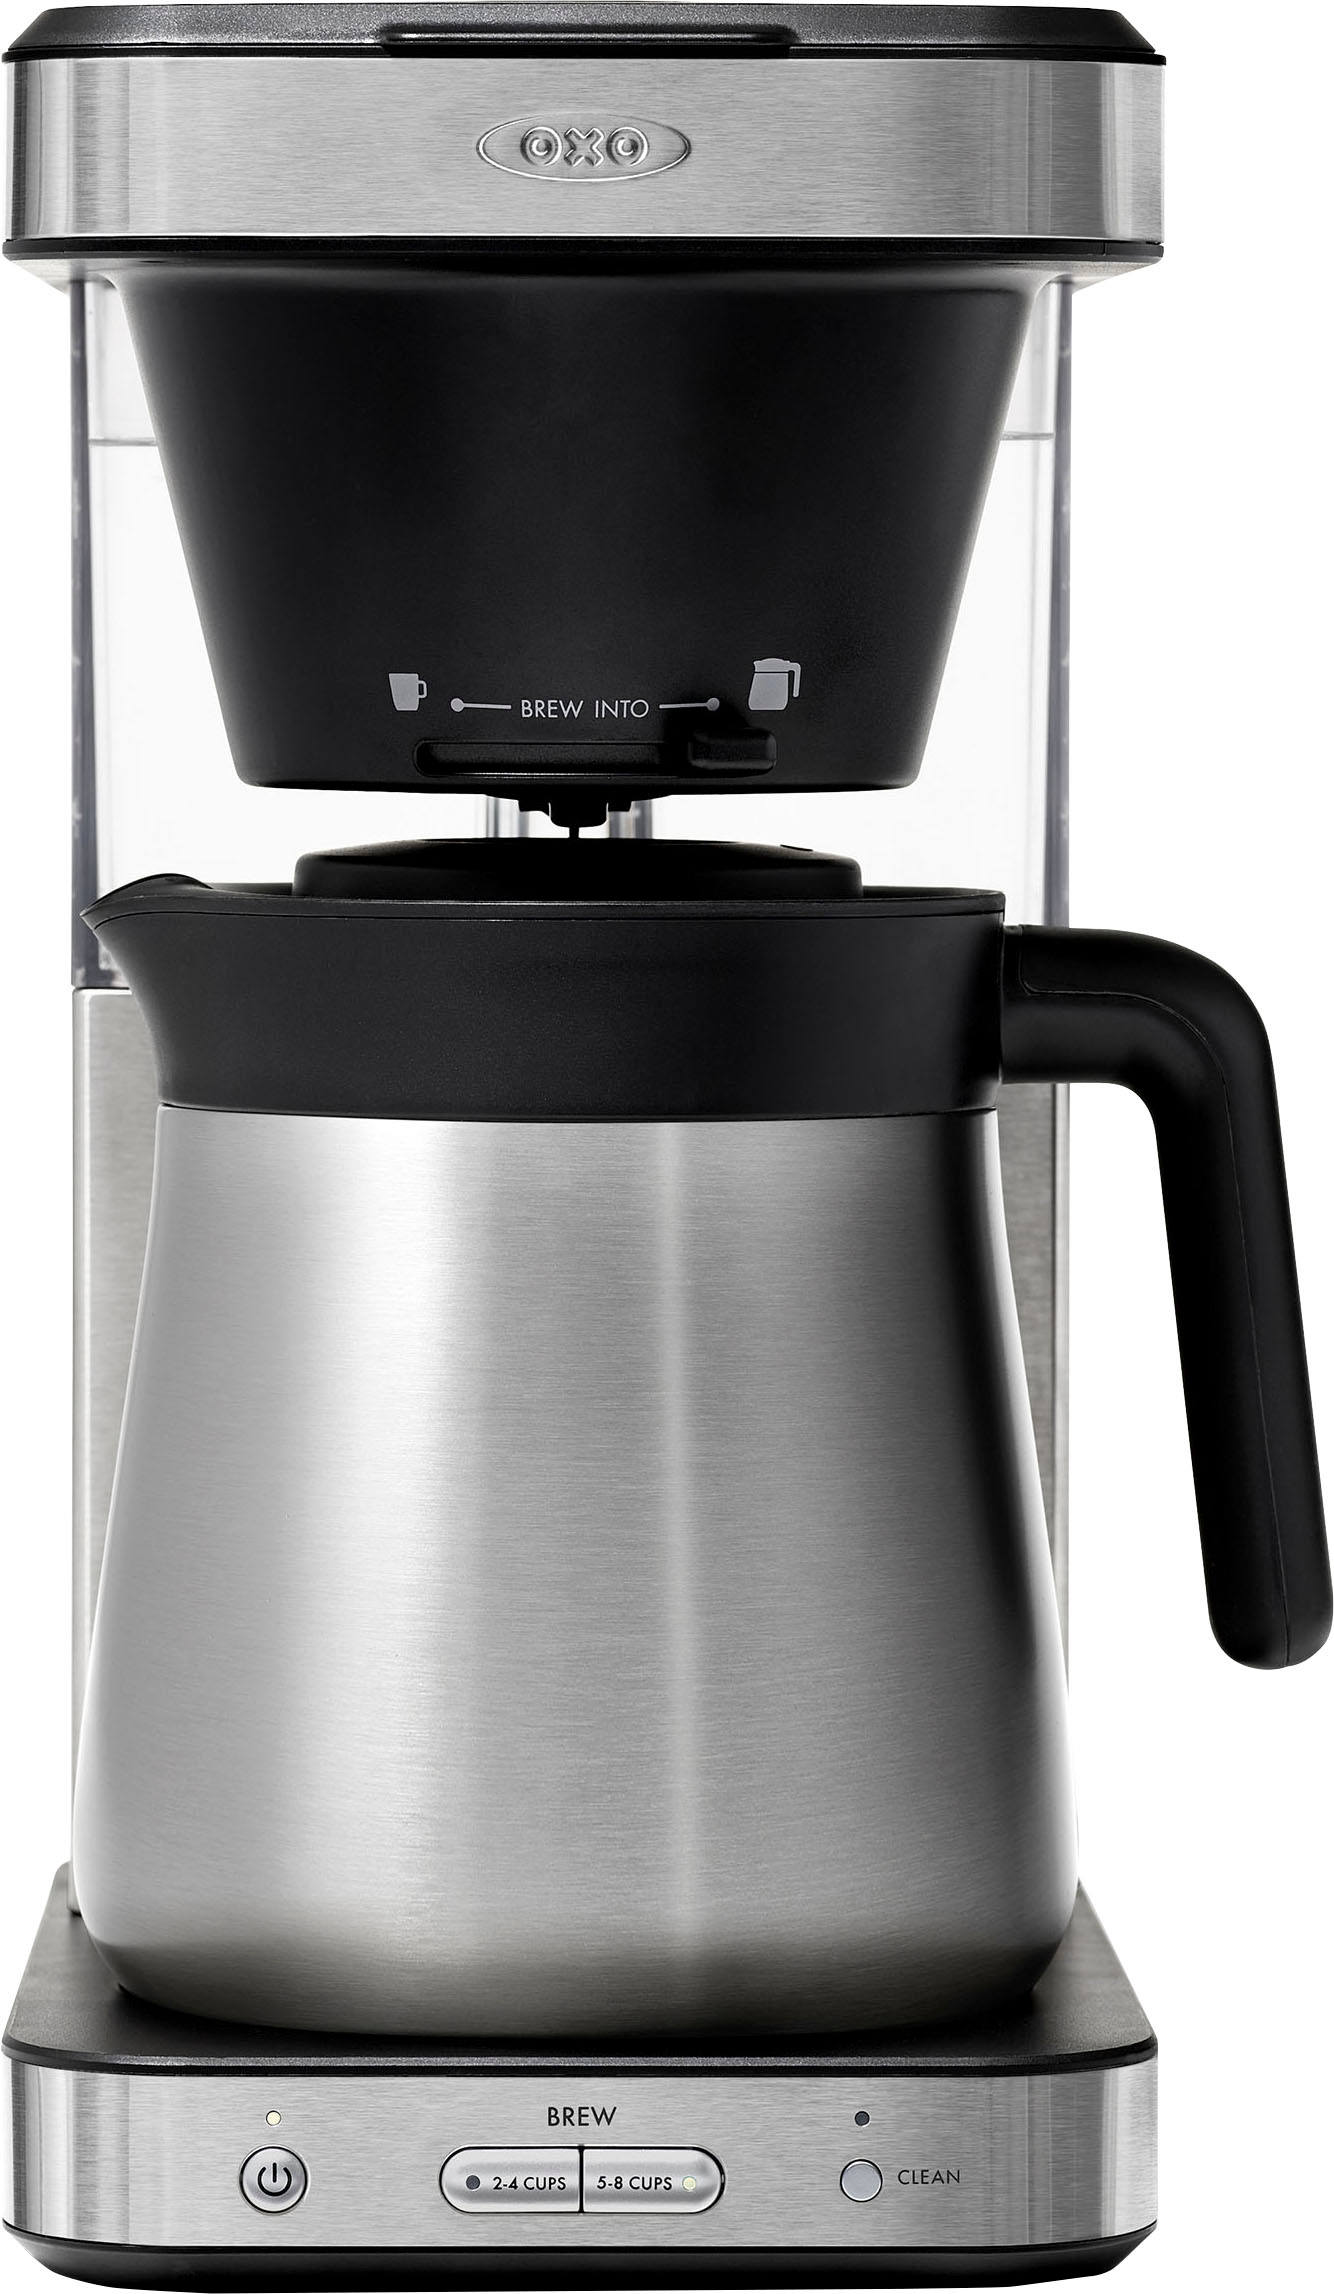 OXO Brew 8 Cup Coffee Maker Stainless Steel 8718800 - Best Buy